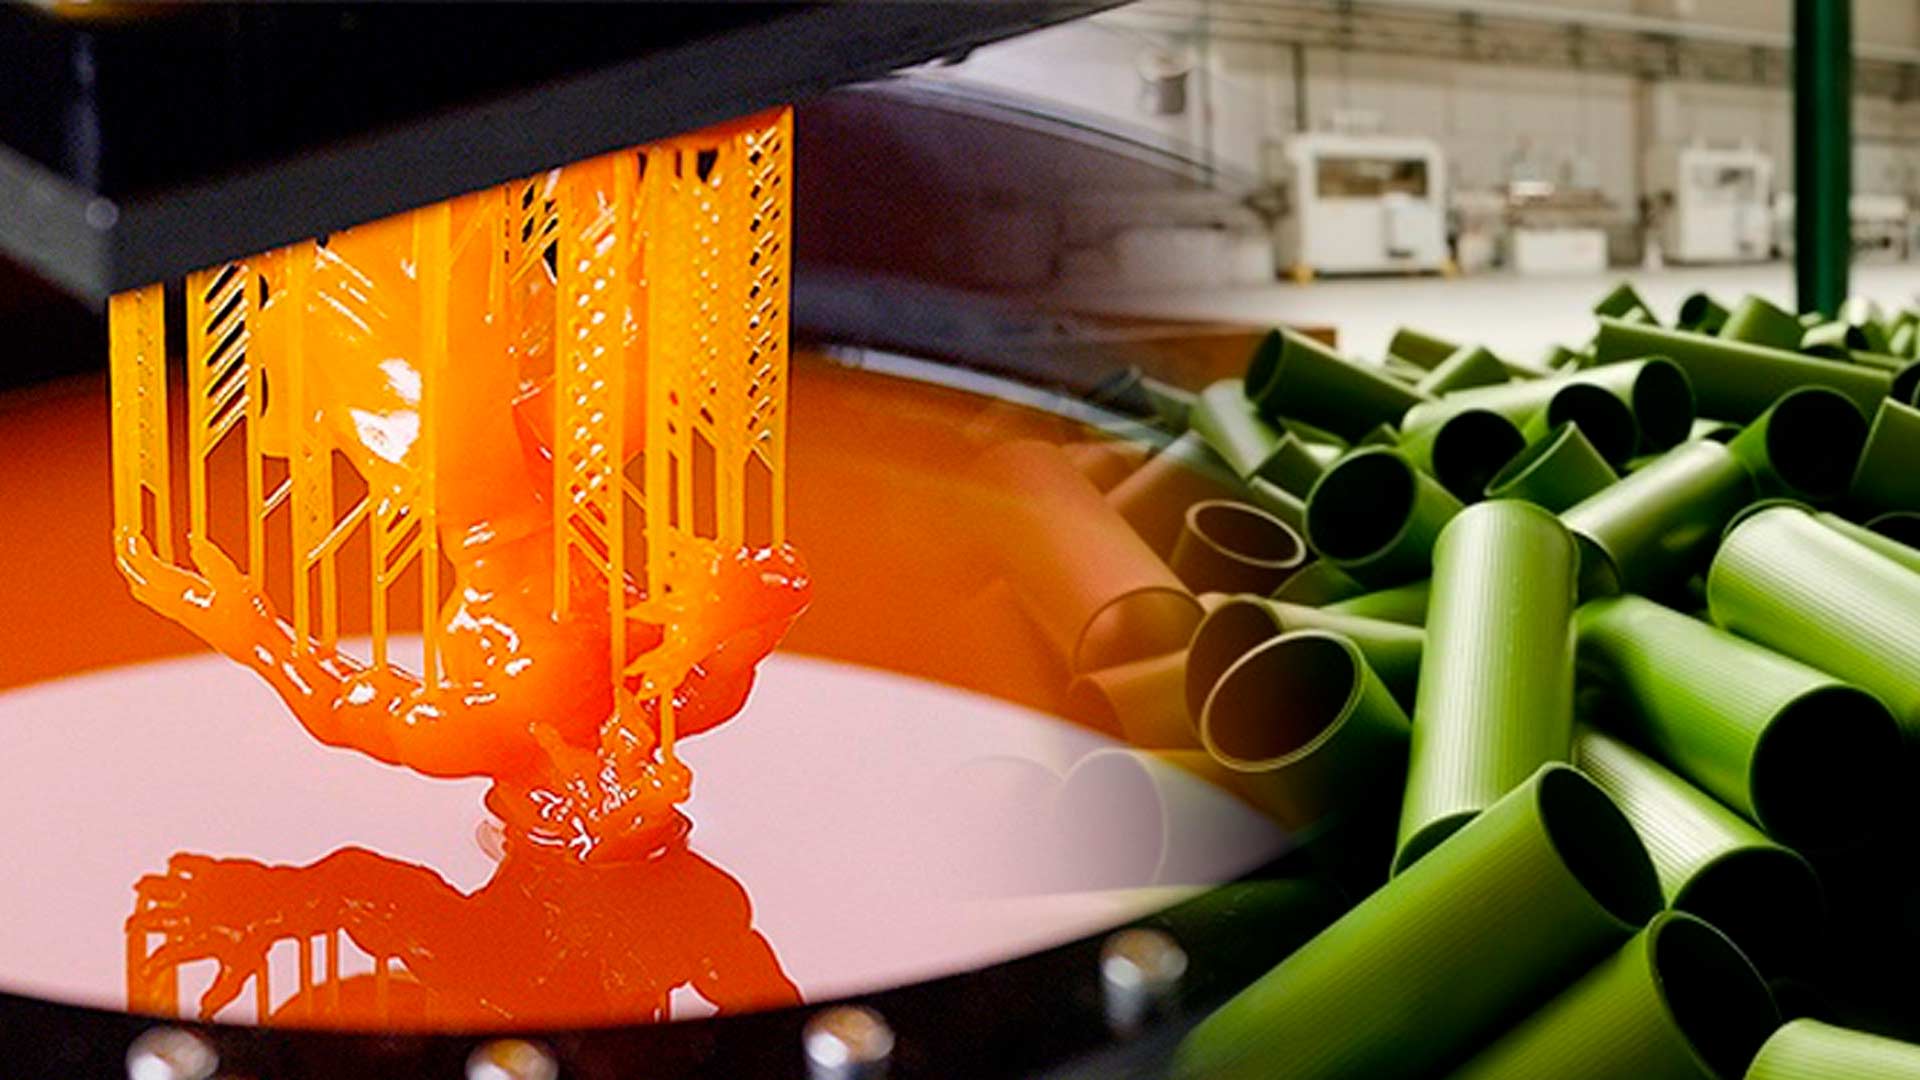 Petrochemical industry breakthroughs already touch 3D printing and bioplastics